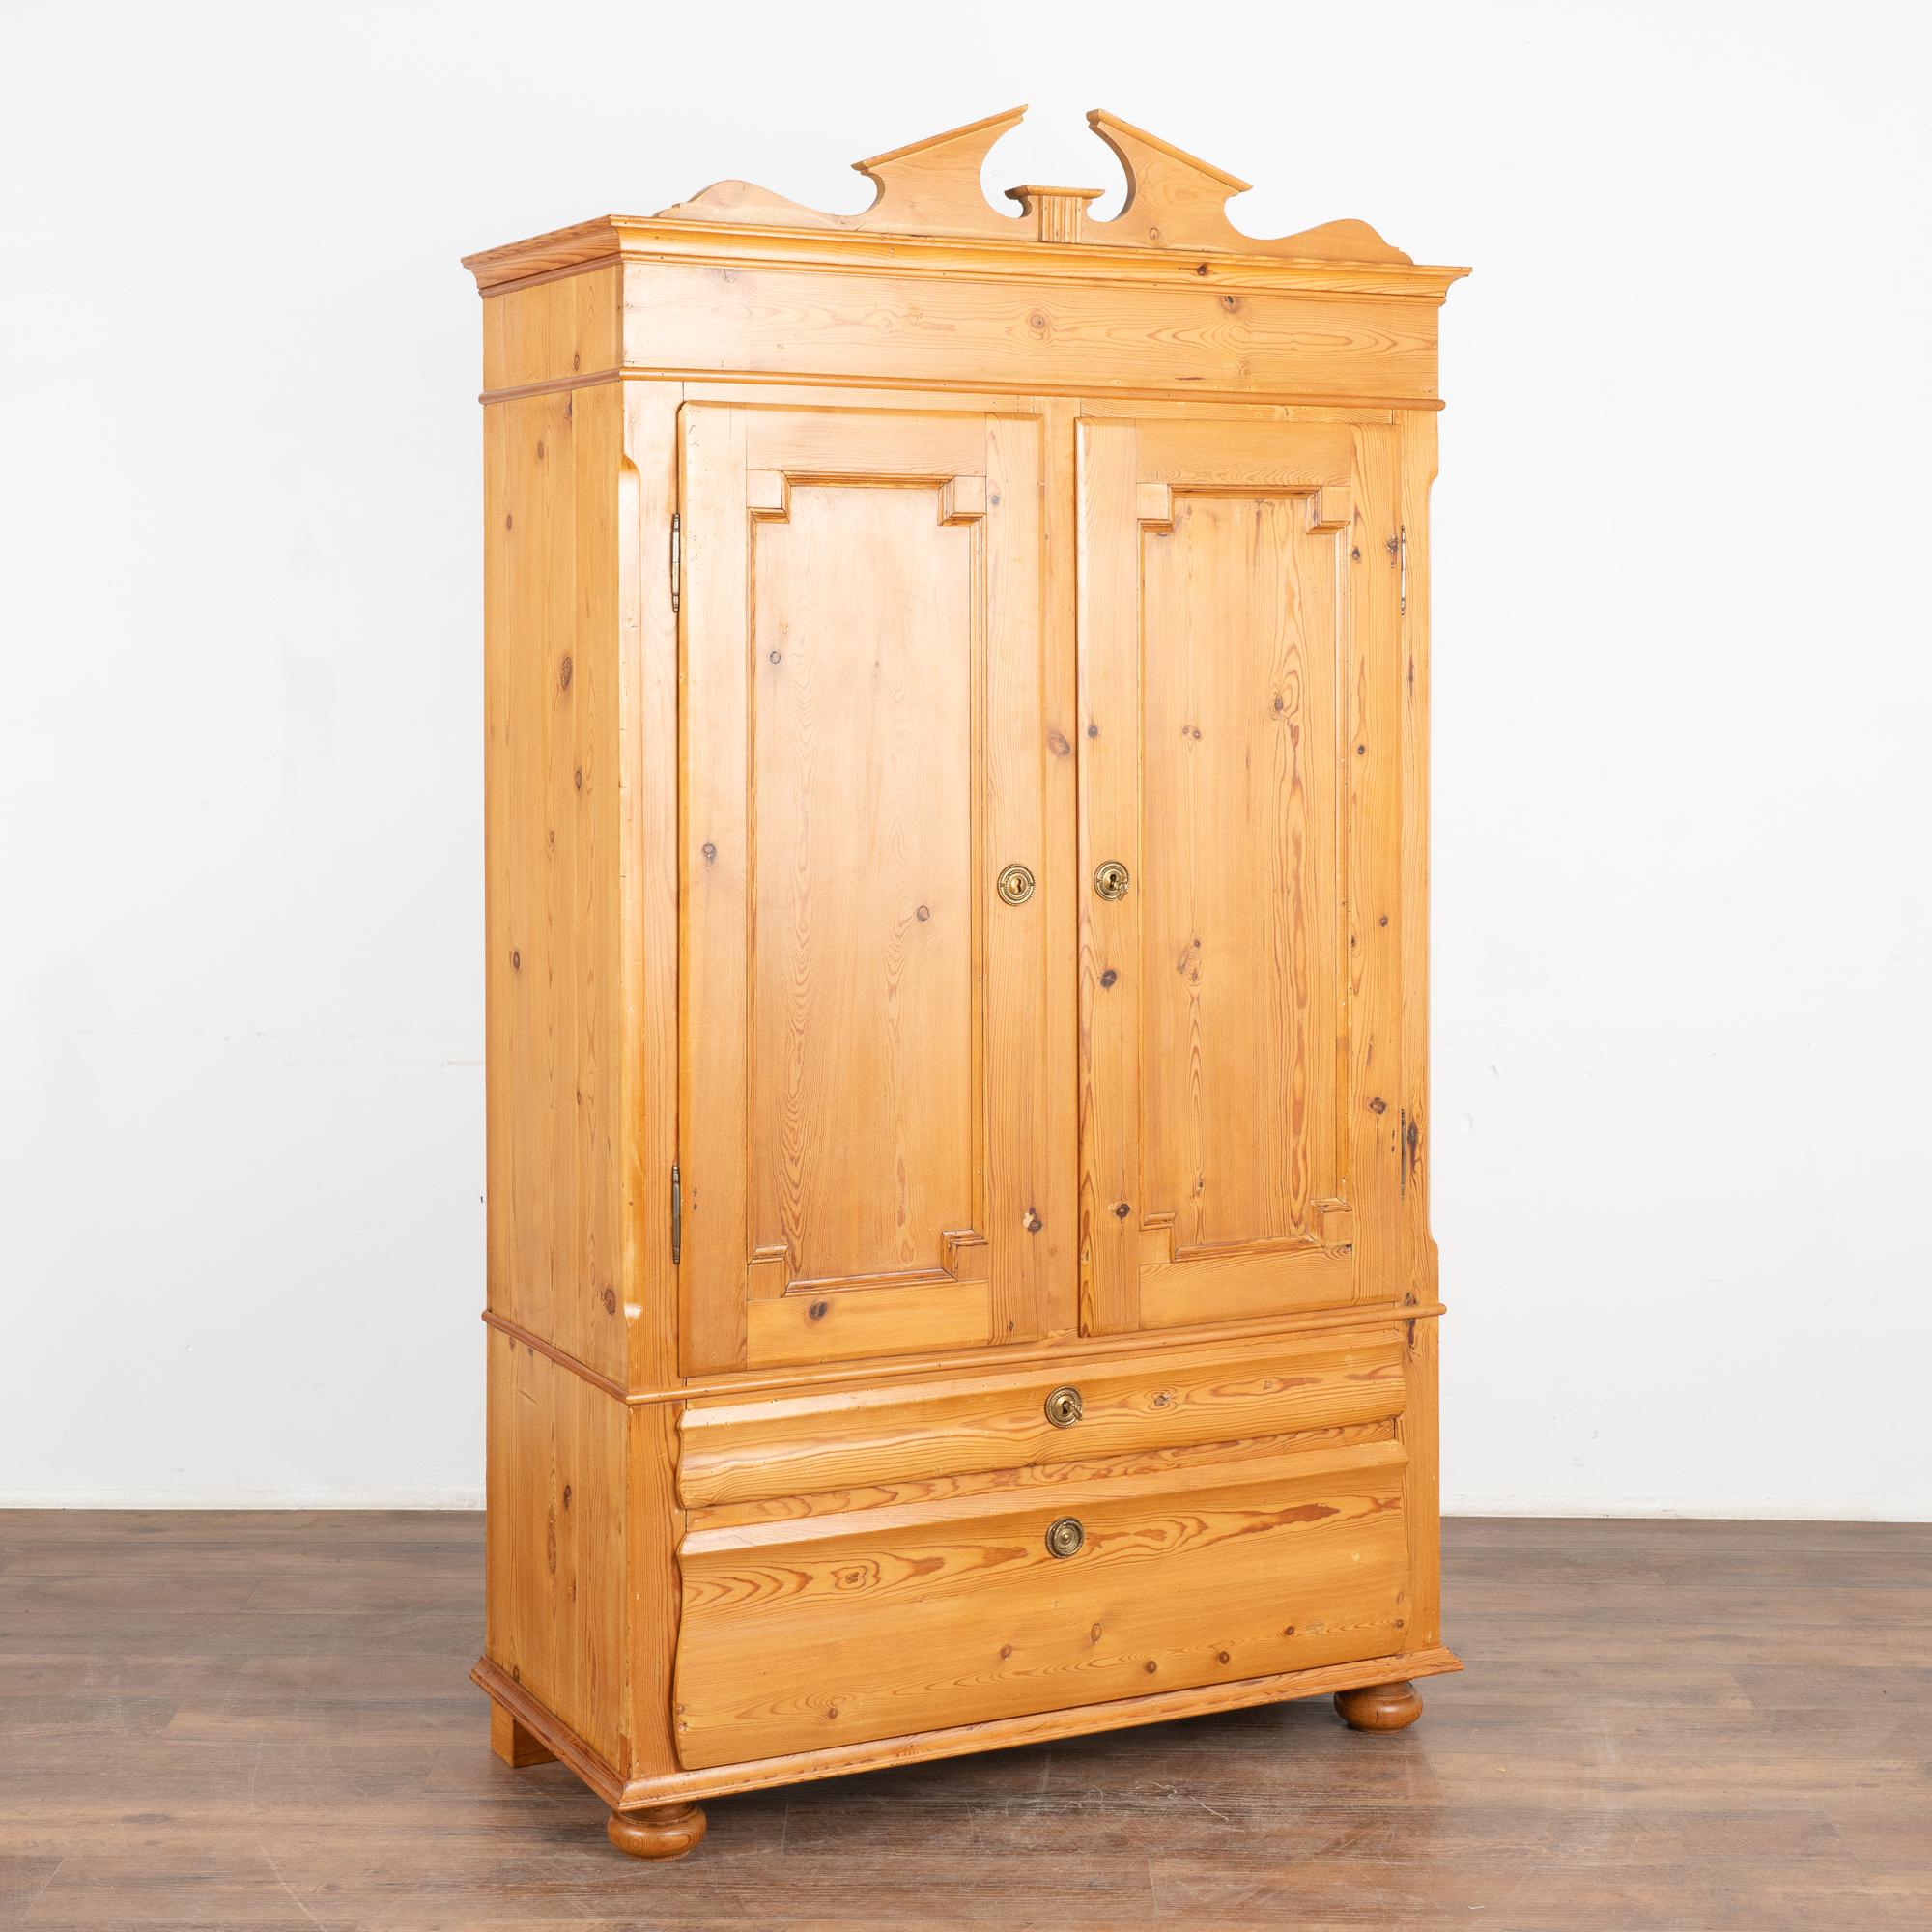 It is the captivating patina of the warm pine that captures one's attention in this lovely armoire.
Note the two lower drawers and red painted interior. Upper decorative crown is easy removed for shipping and if client desires a more simple overall